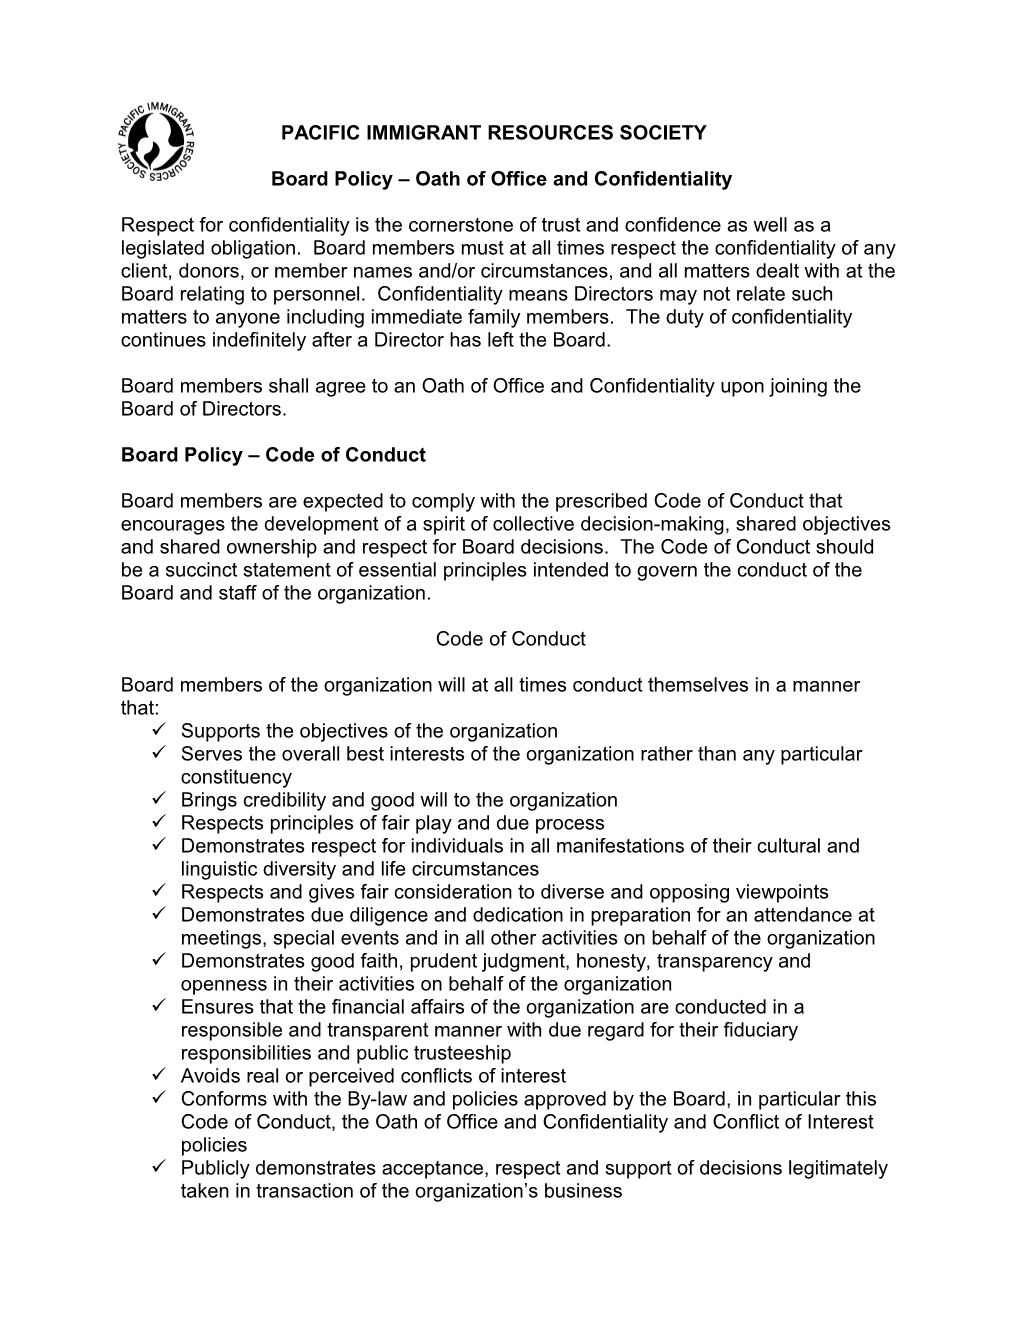 Board Policy Oath of Office and Confidentiality